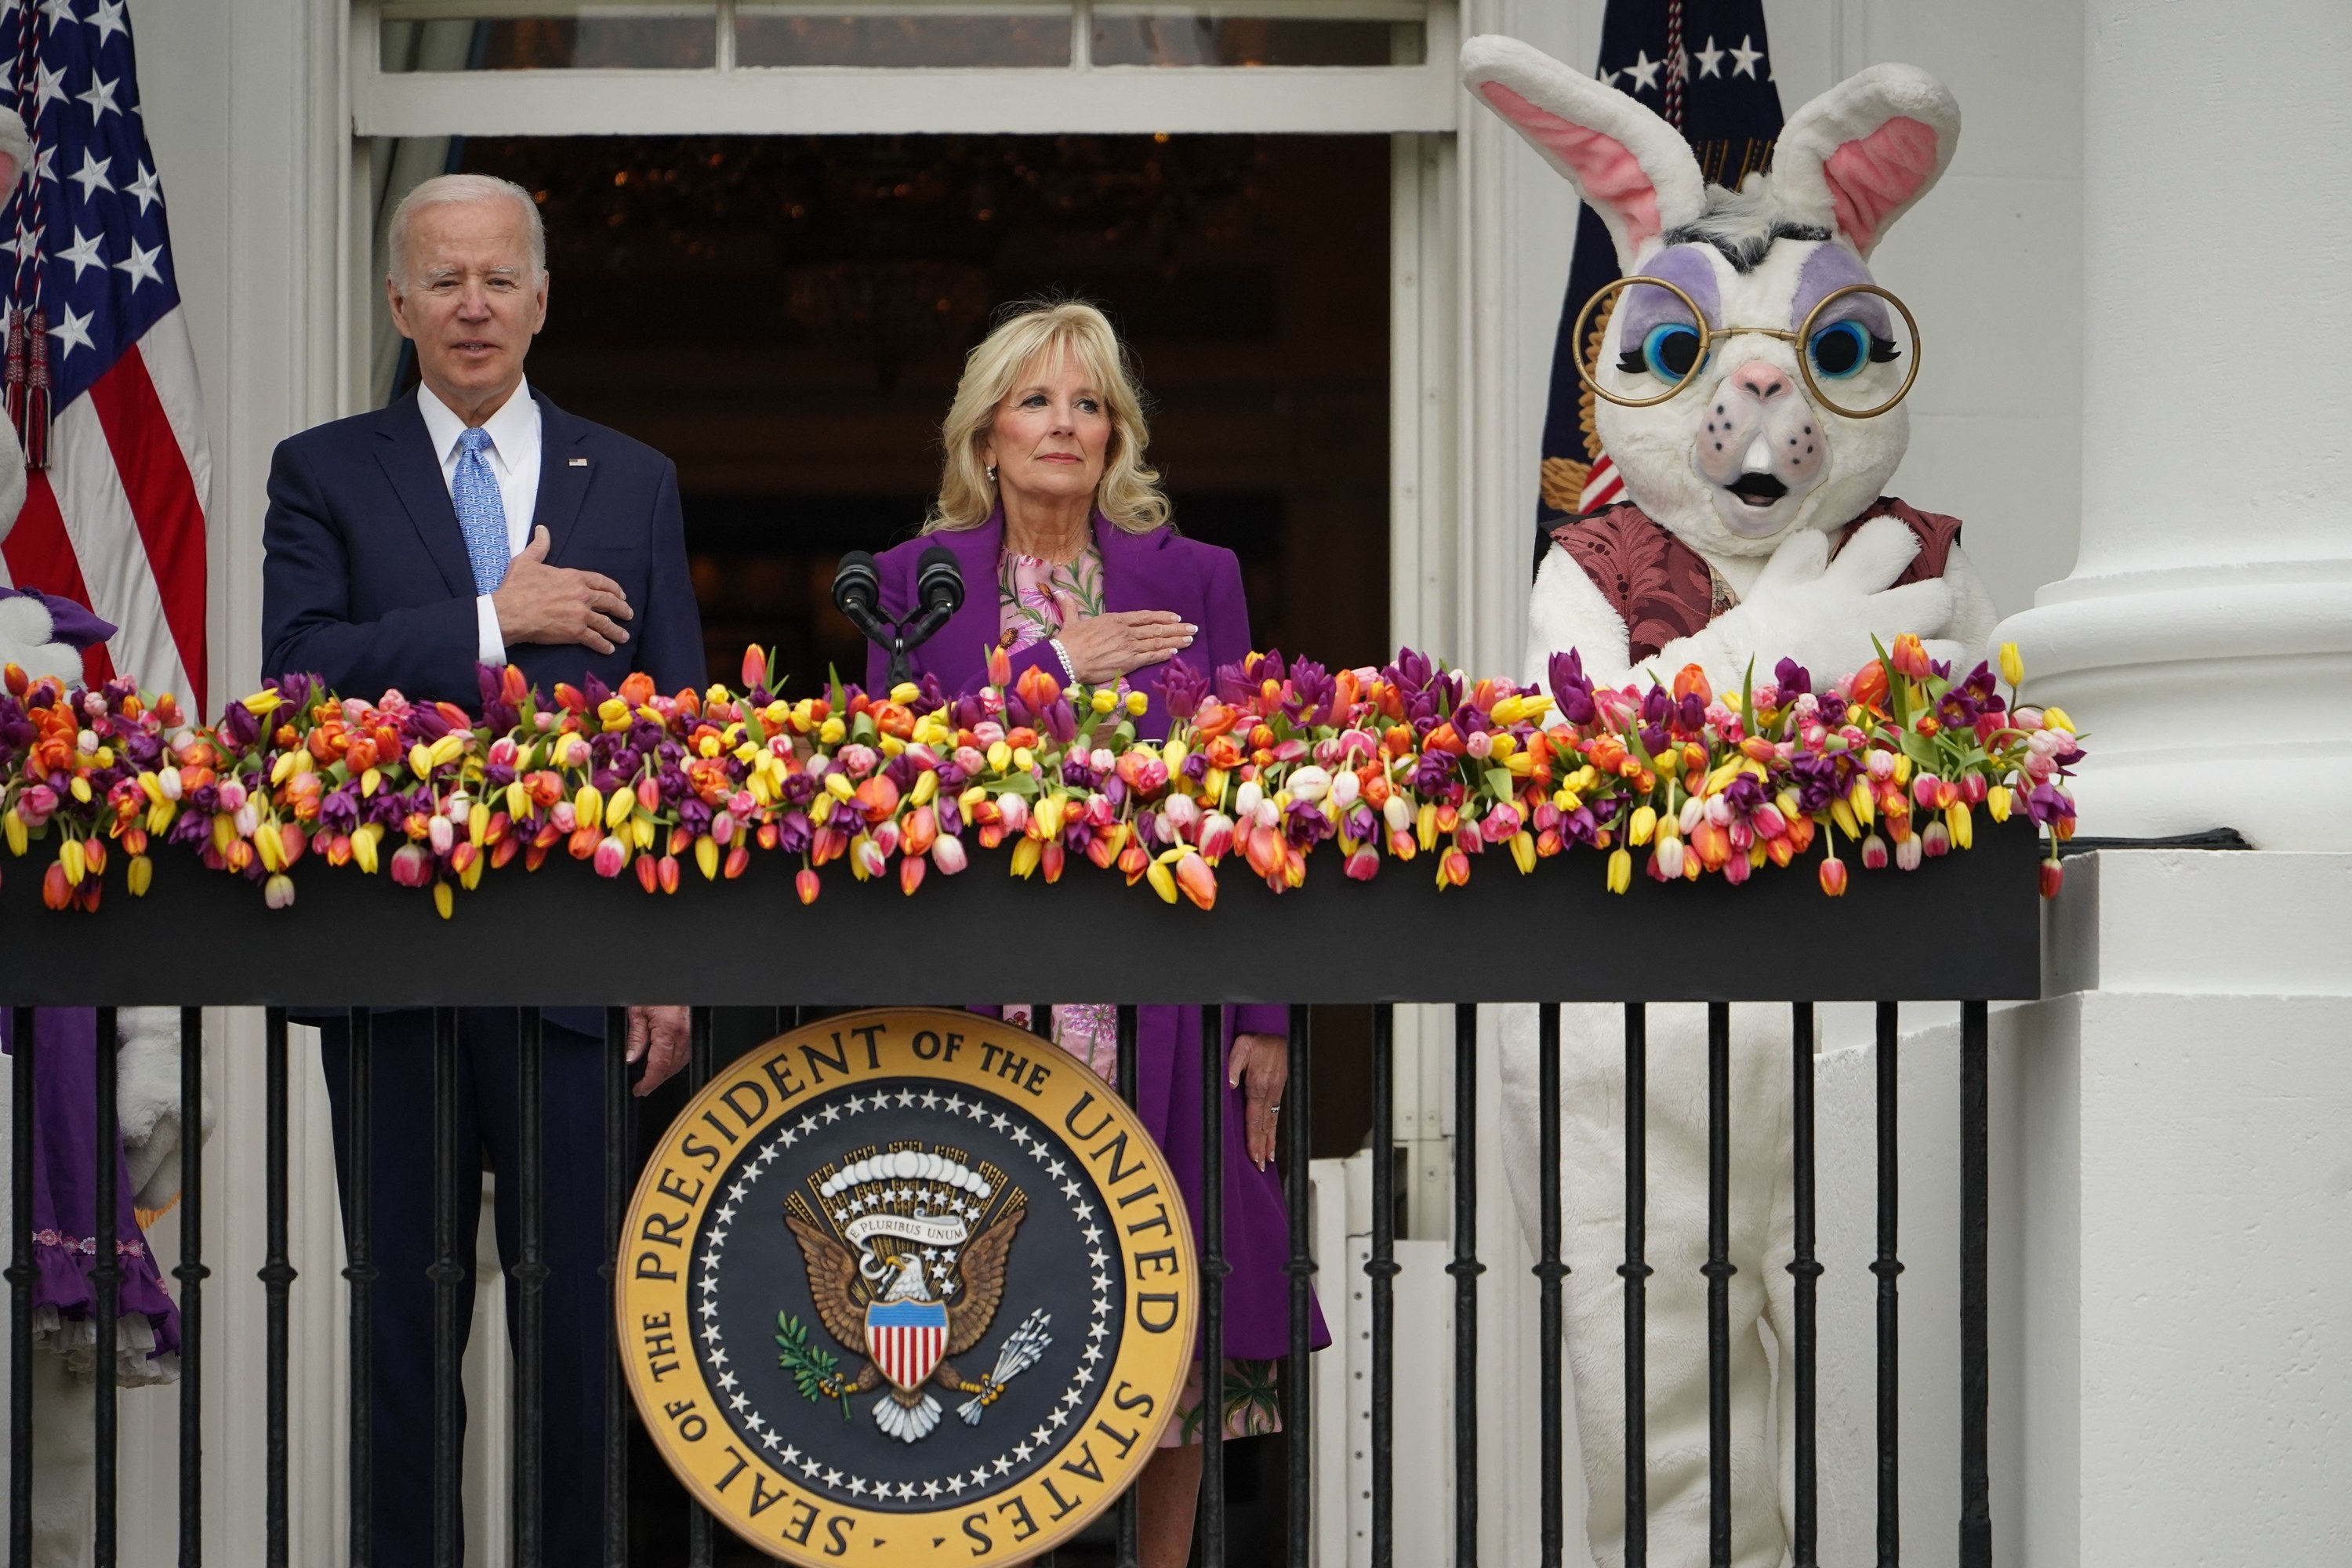 The Bidens and the shocked bunny have their hands on their hearts